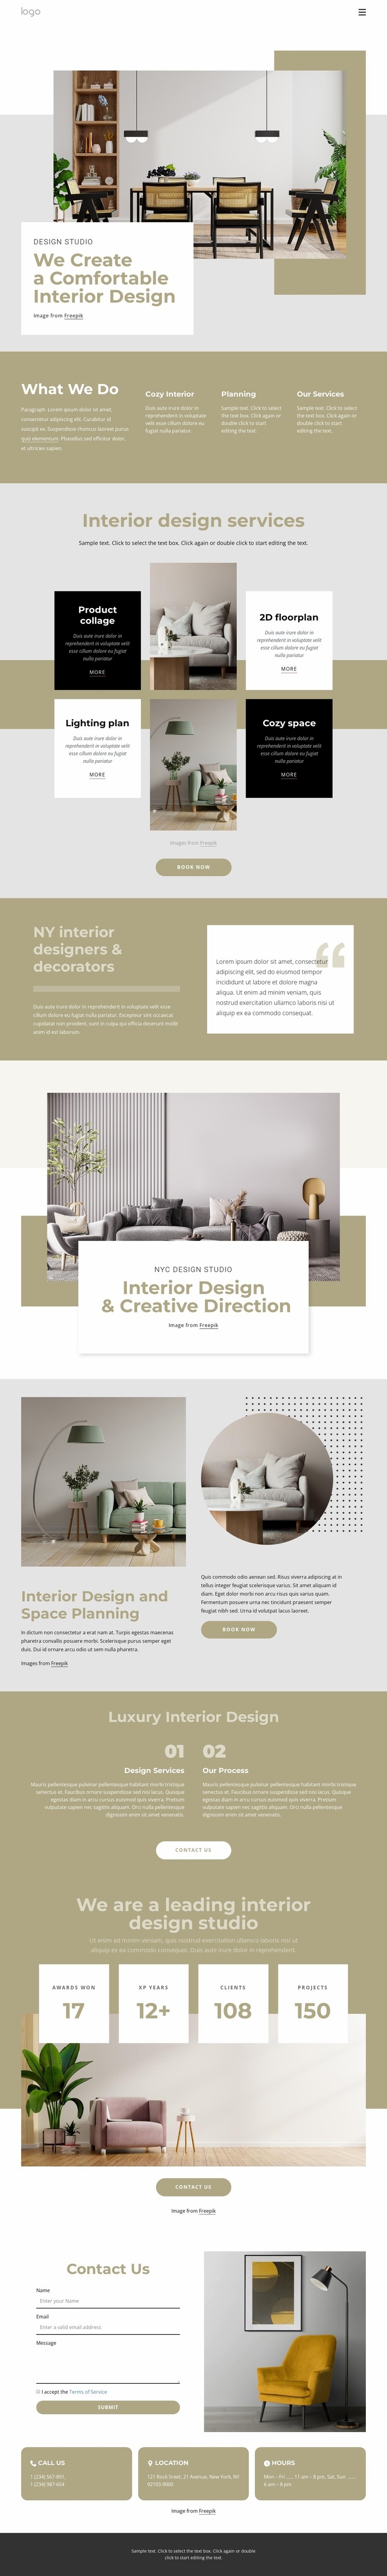 We create a comfortable interiors Web Page Design